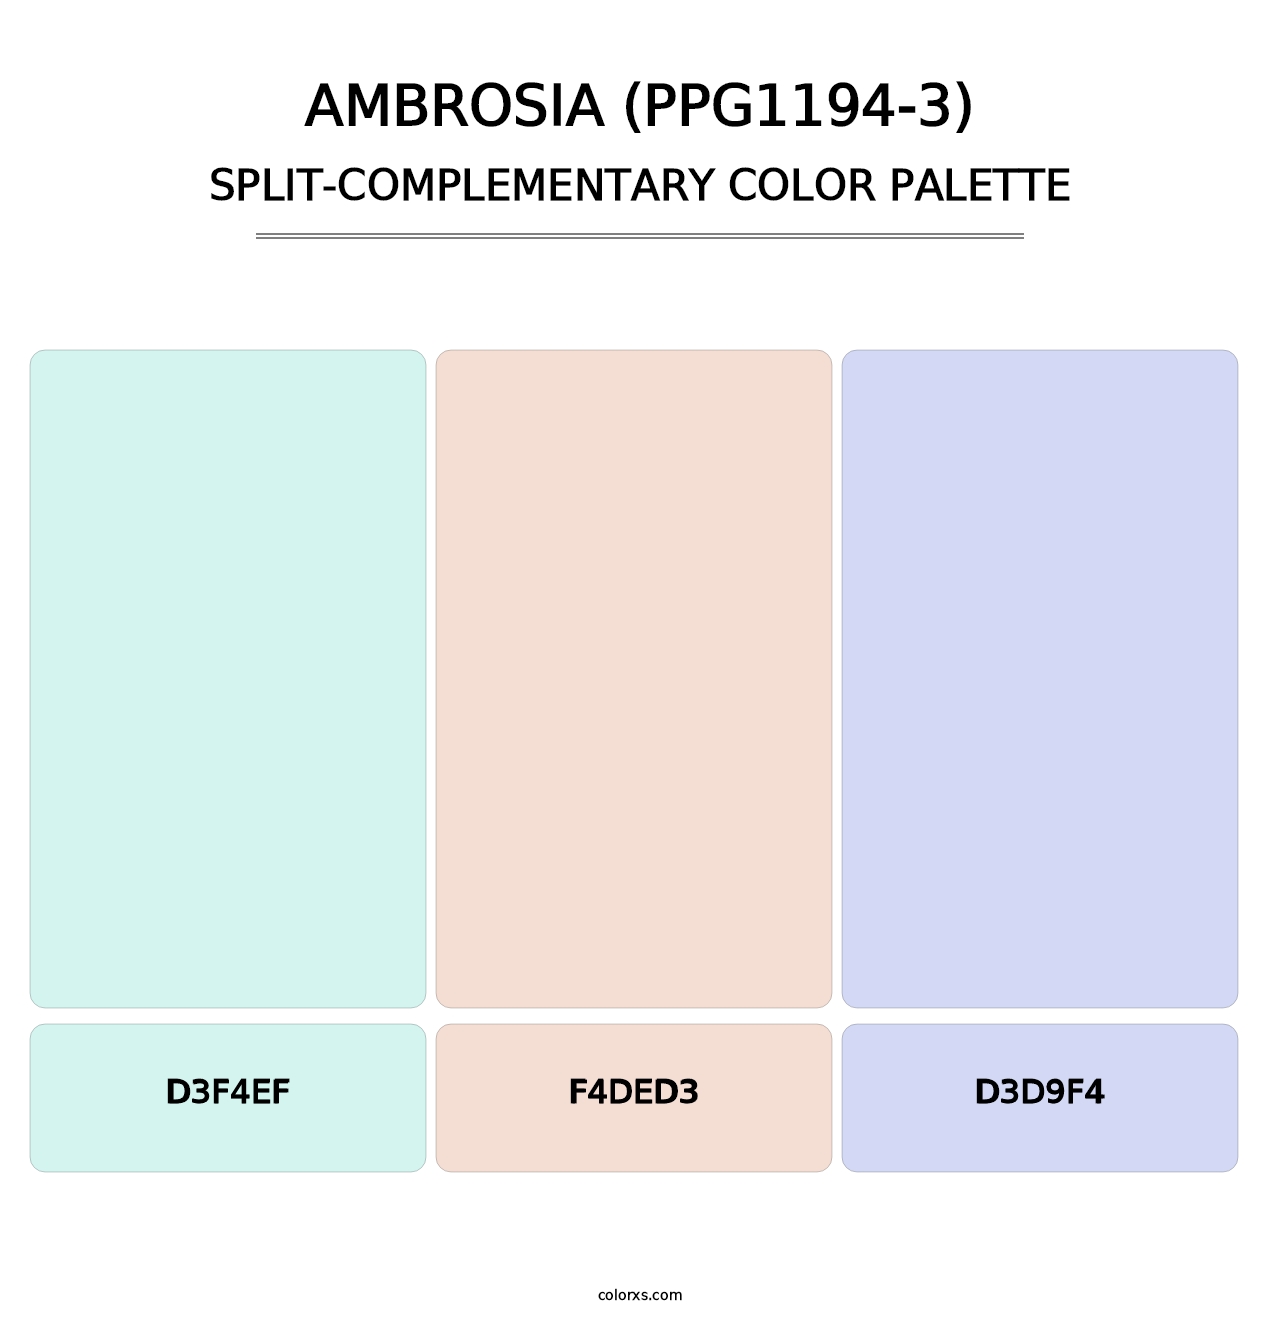 Ambrosia (PPG1194-3) - Split-Complementary Color Palette